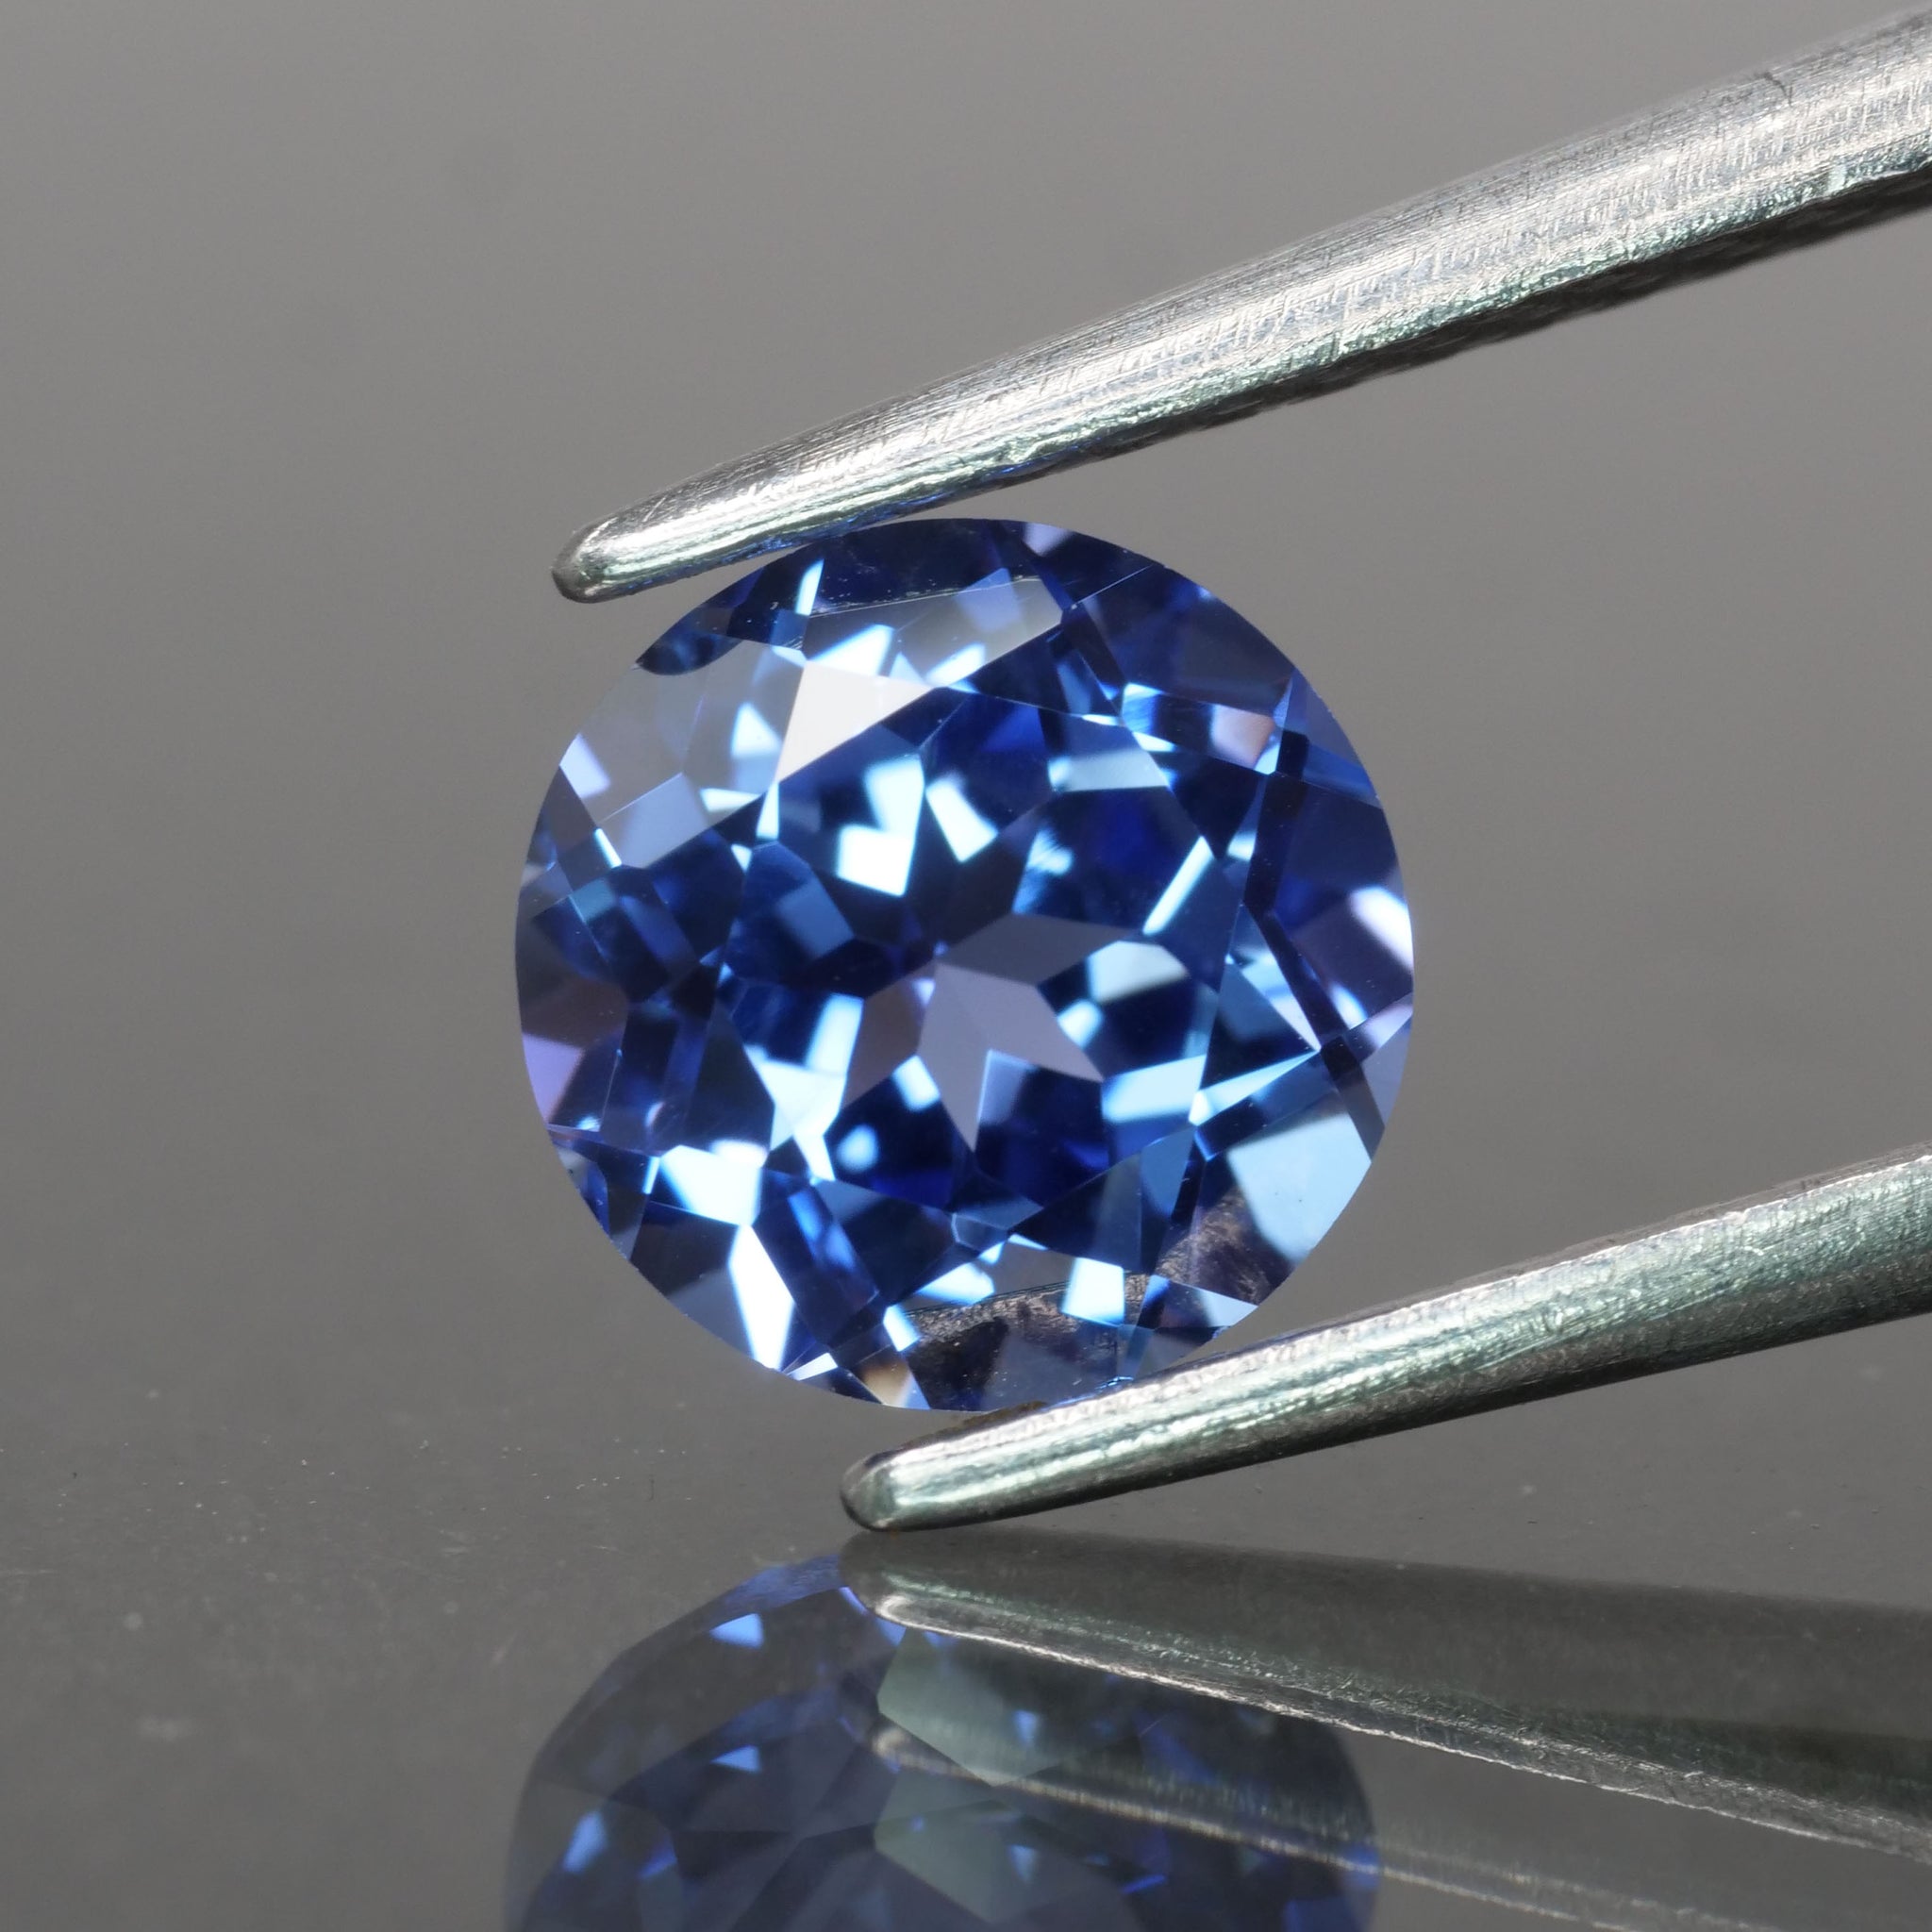 Sapphire | Royal Blue color, lab created, round cut, 6.5mm VS 1.4ct - Eden Garden Jewelry™